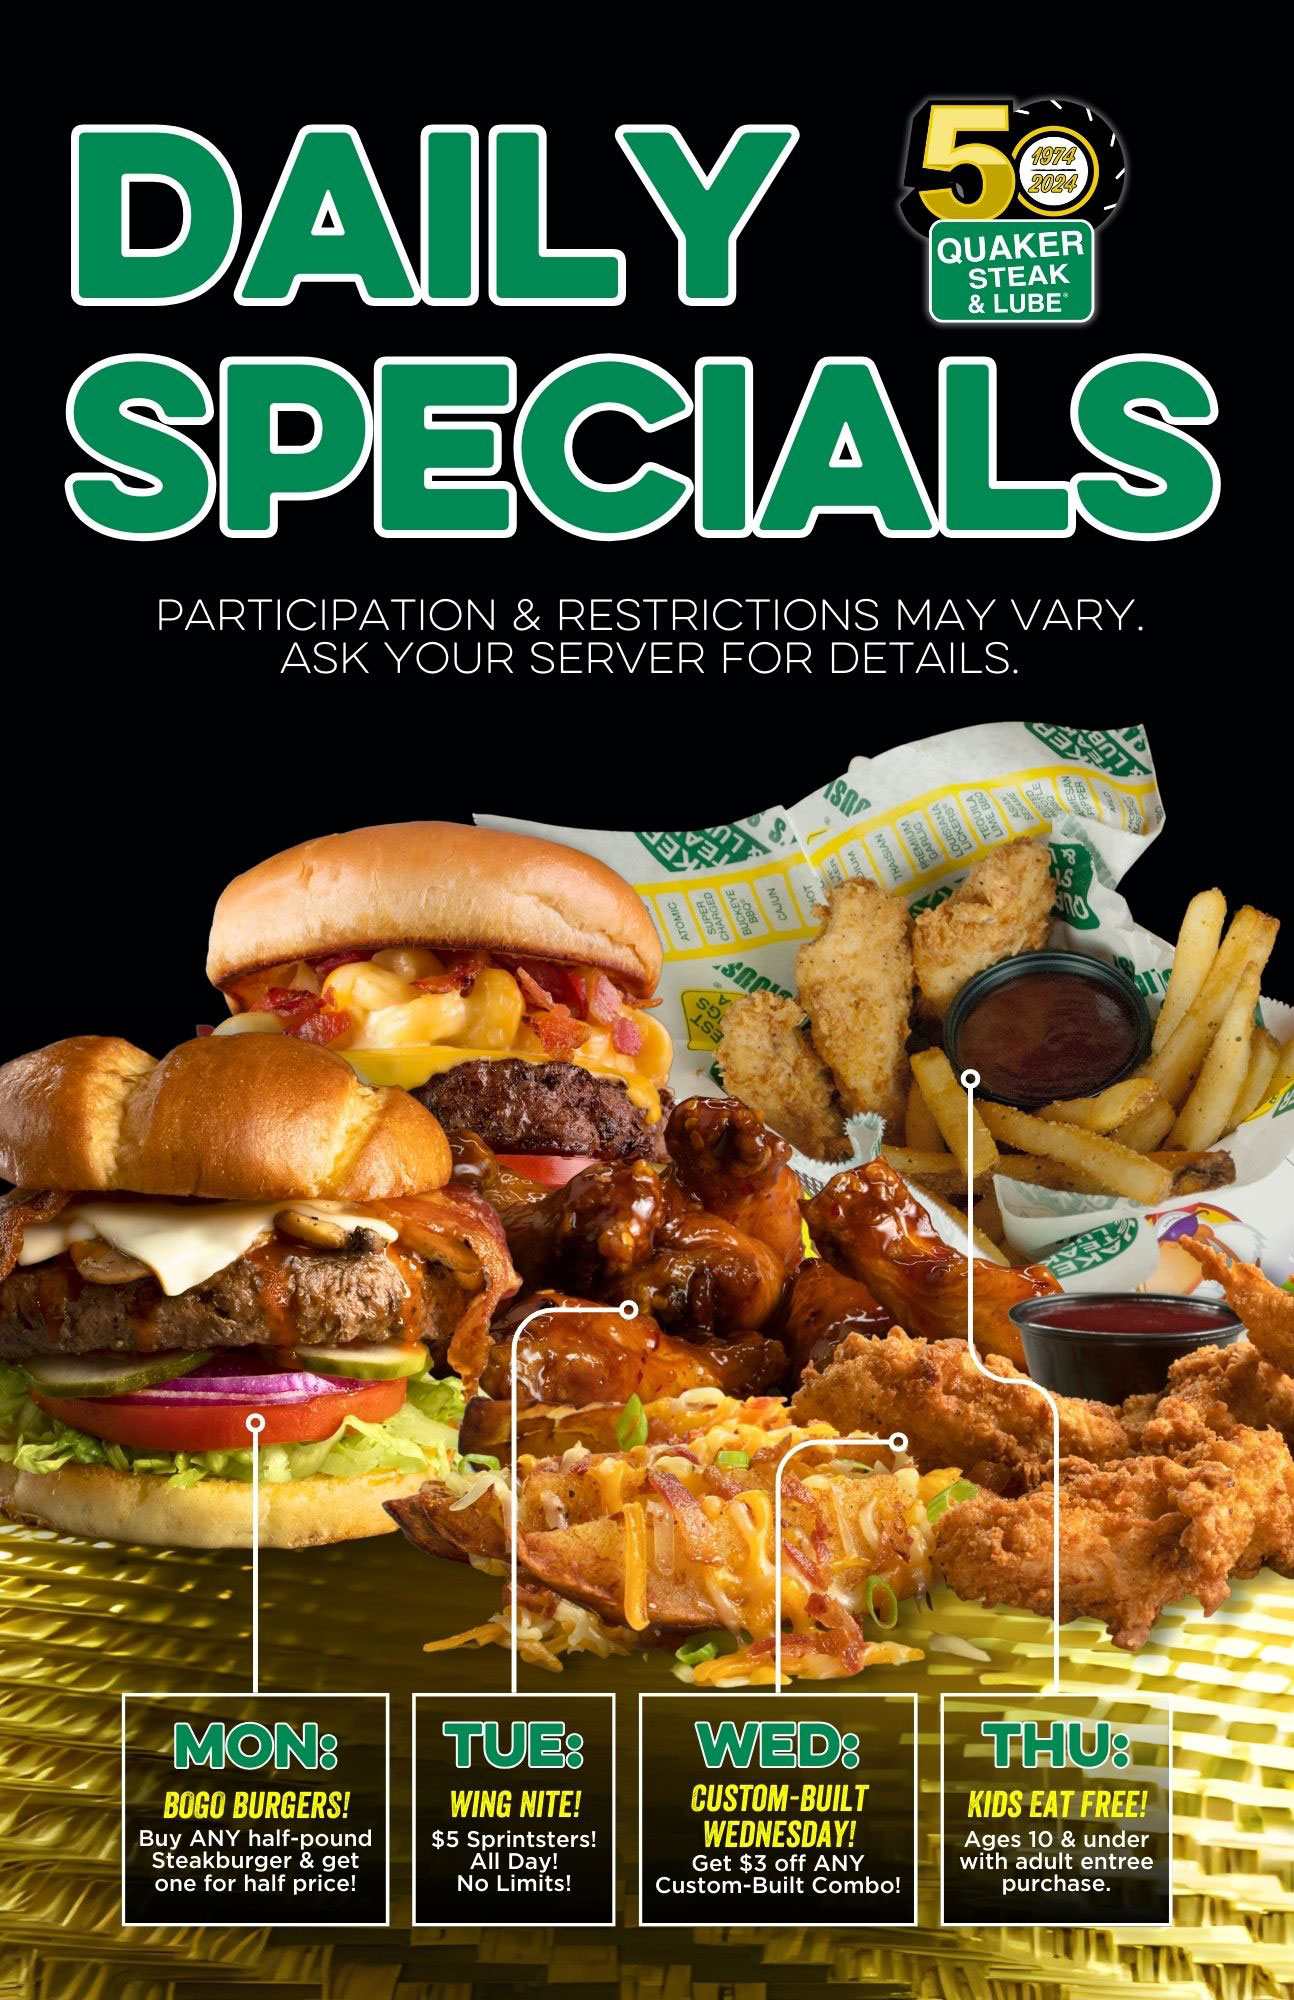 Daily Specials At the Quaker Steak & Lube Bloomsburg Restaurant